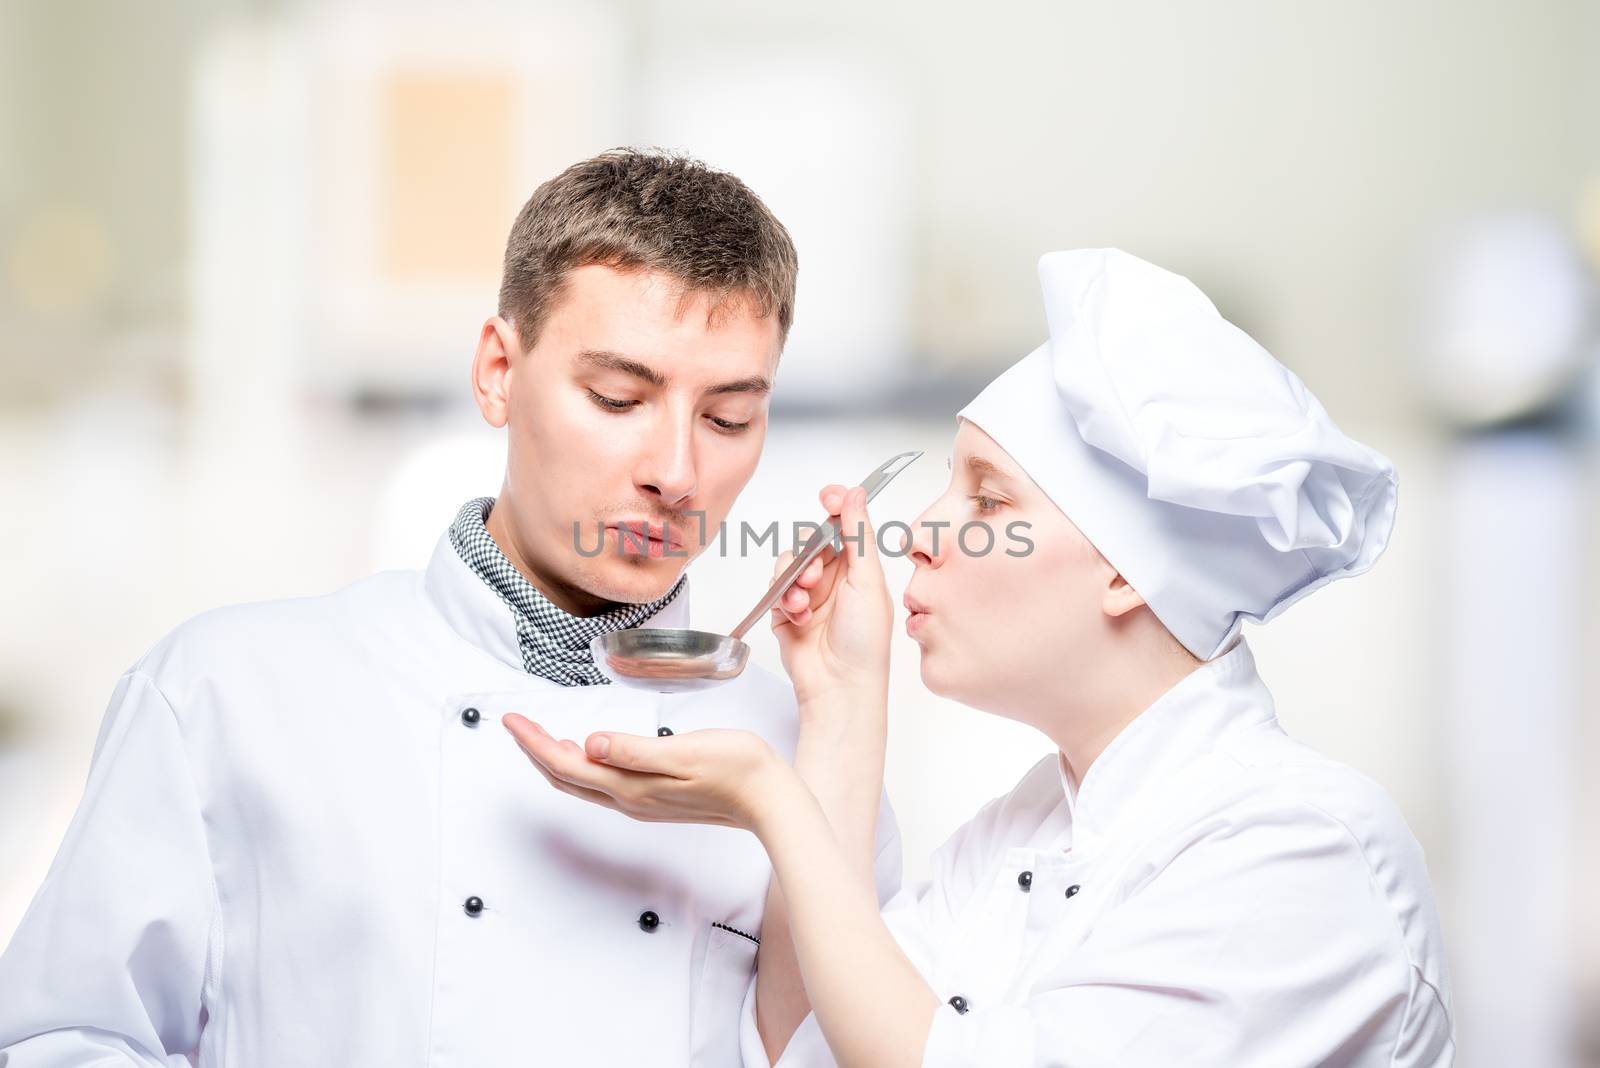 professional chefs try soup from a ladle on the background of th by kosmsos111